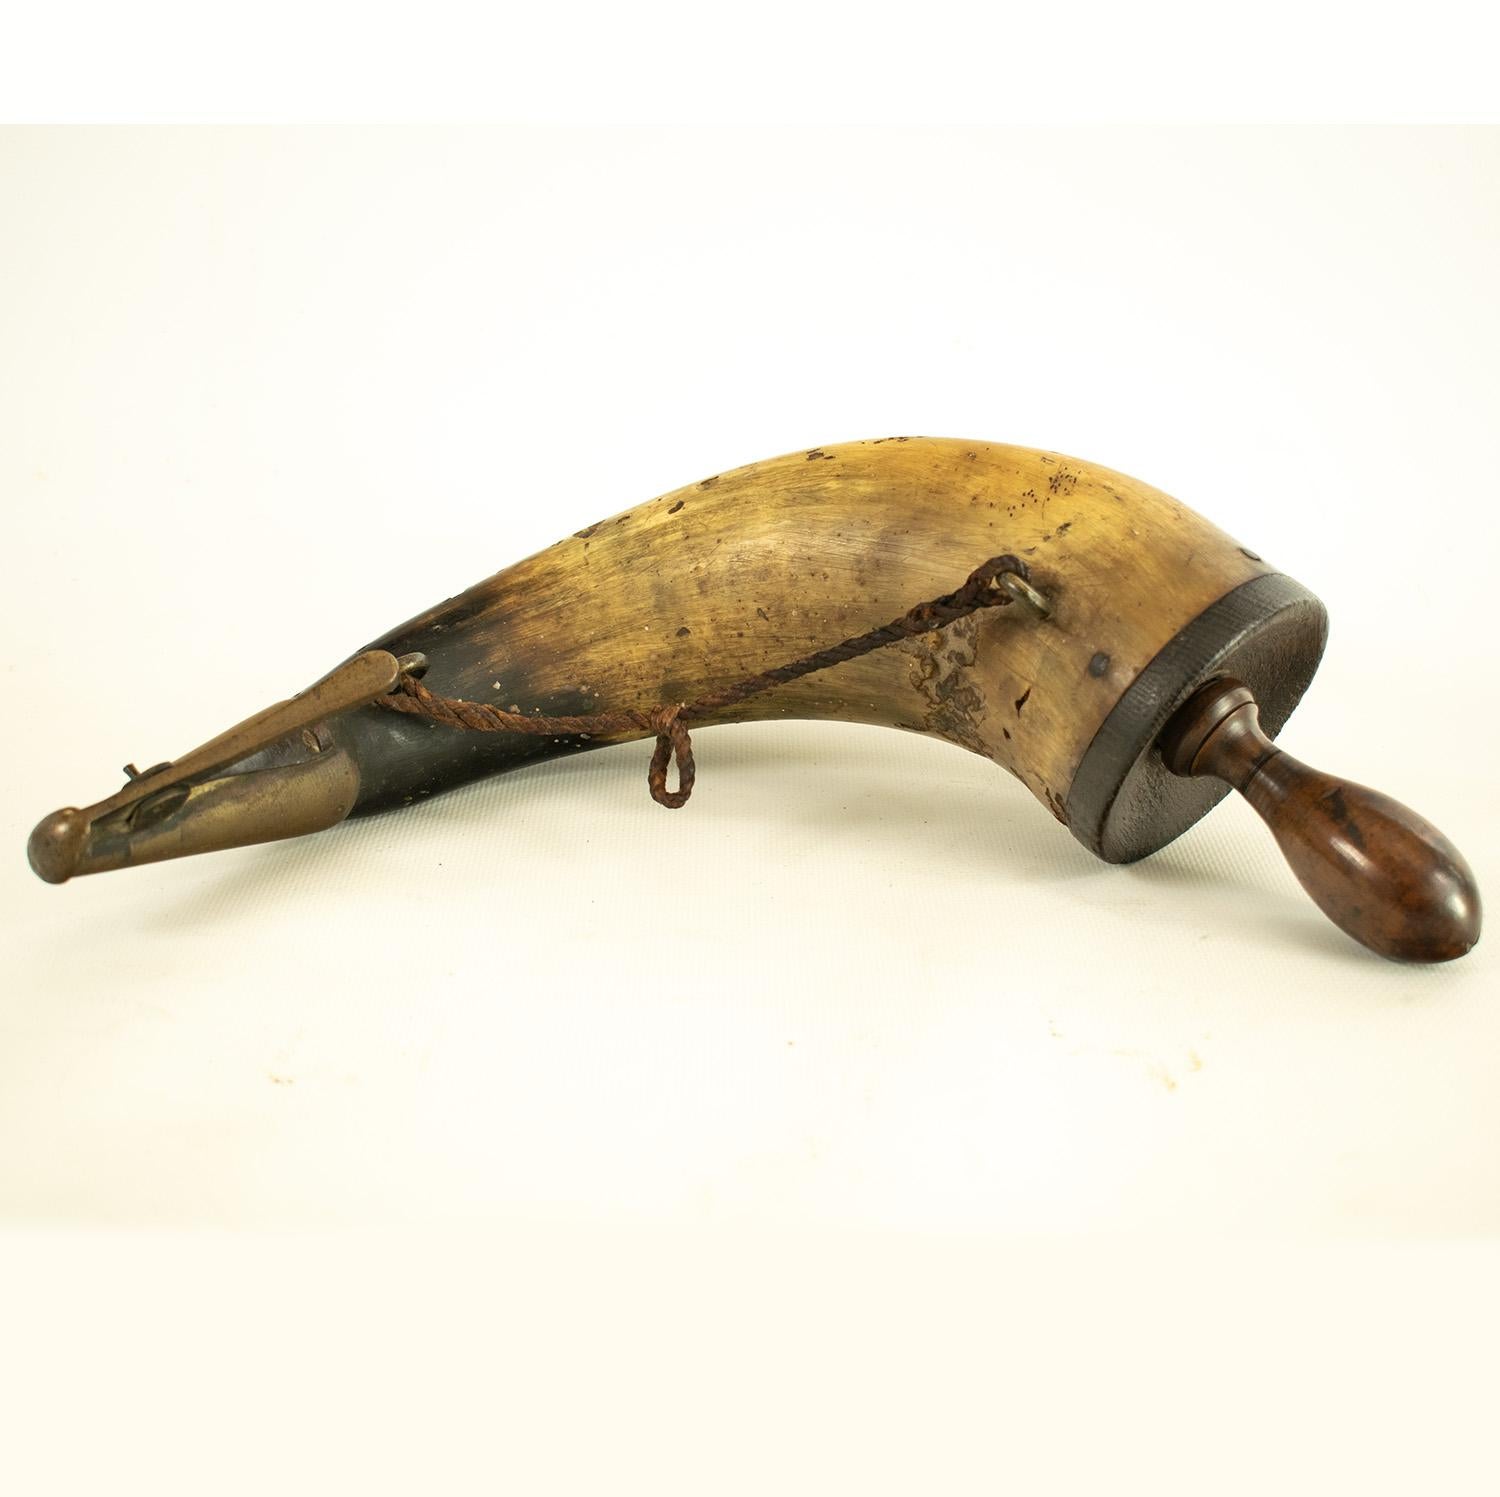 Original Large French Gunner's Powder Horn, Naval - French, late 18th century. Of large size used to load cannons aboard ship.

With fitted wooden plug and brass dispensing spout.

The French Naval Gunner's Powder Horn was used for priming cannons